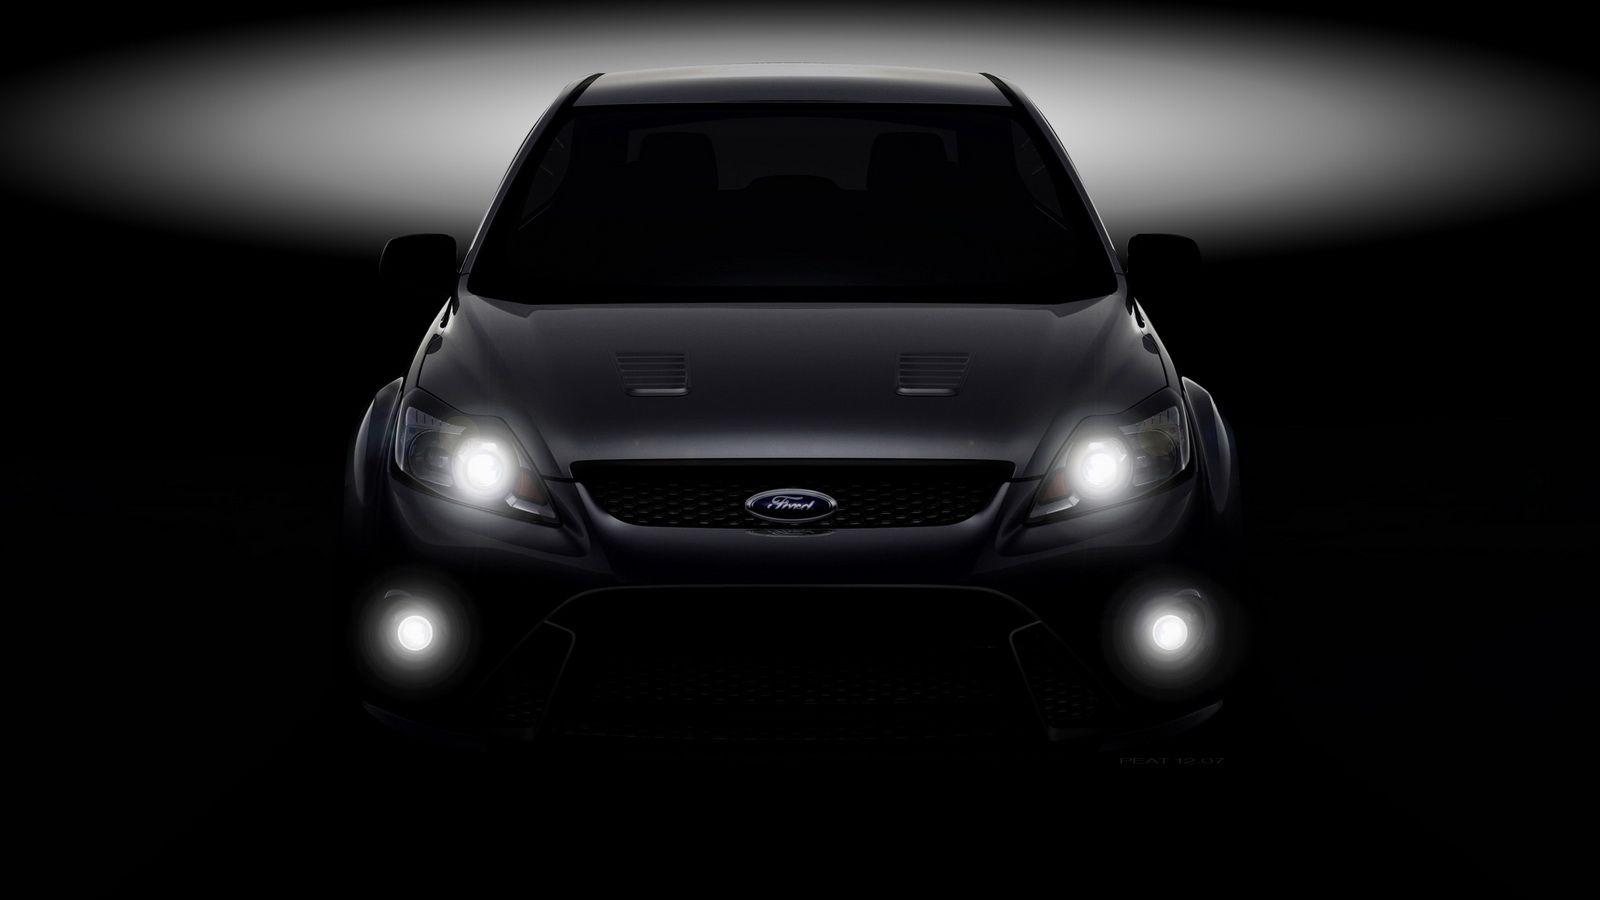 Ford Focus Wallpapers Group with items